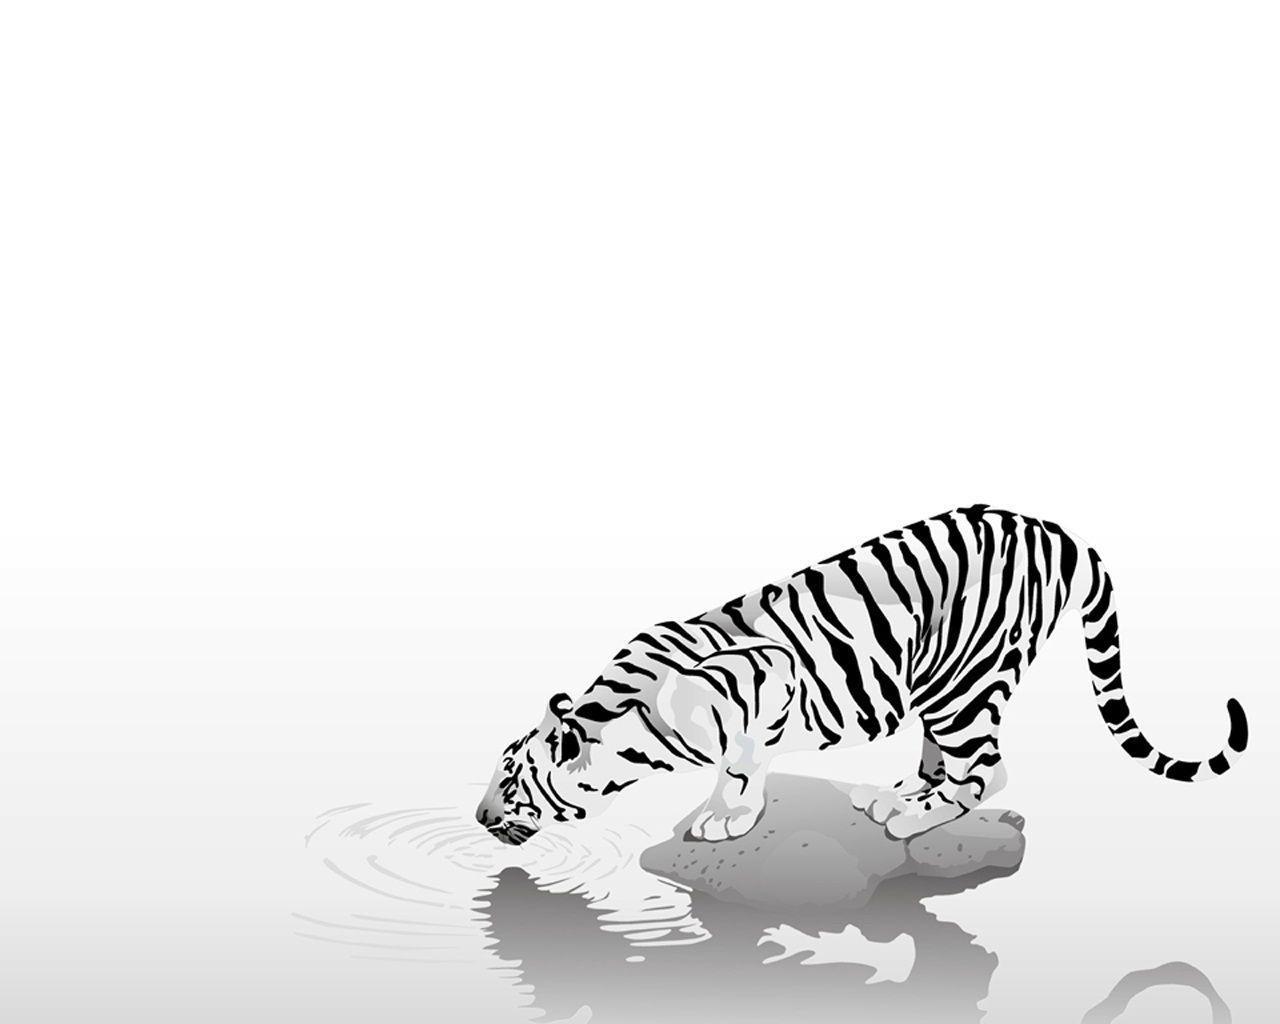 White Tiger Cubs Wallpaper, wallpaper, White Tiger Cubs Wallpapers